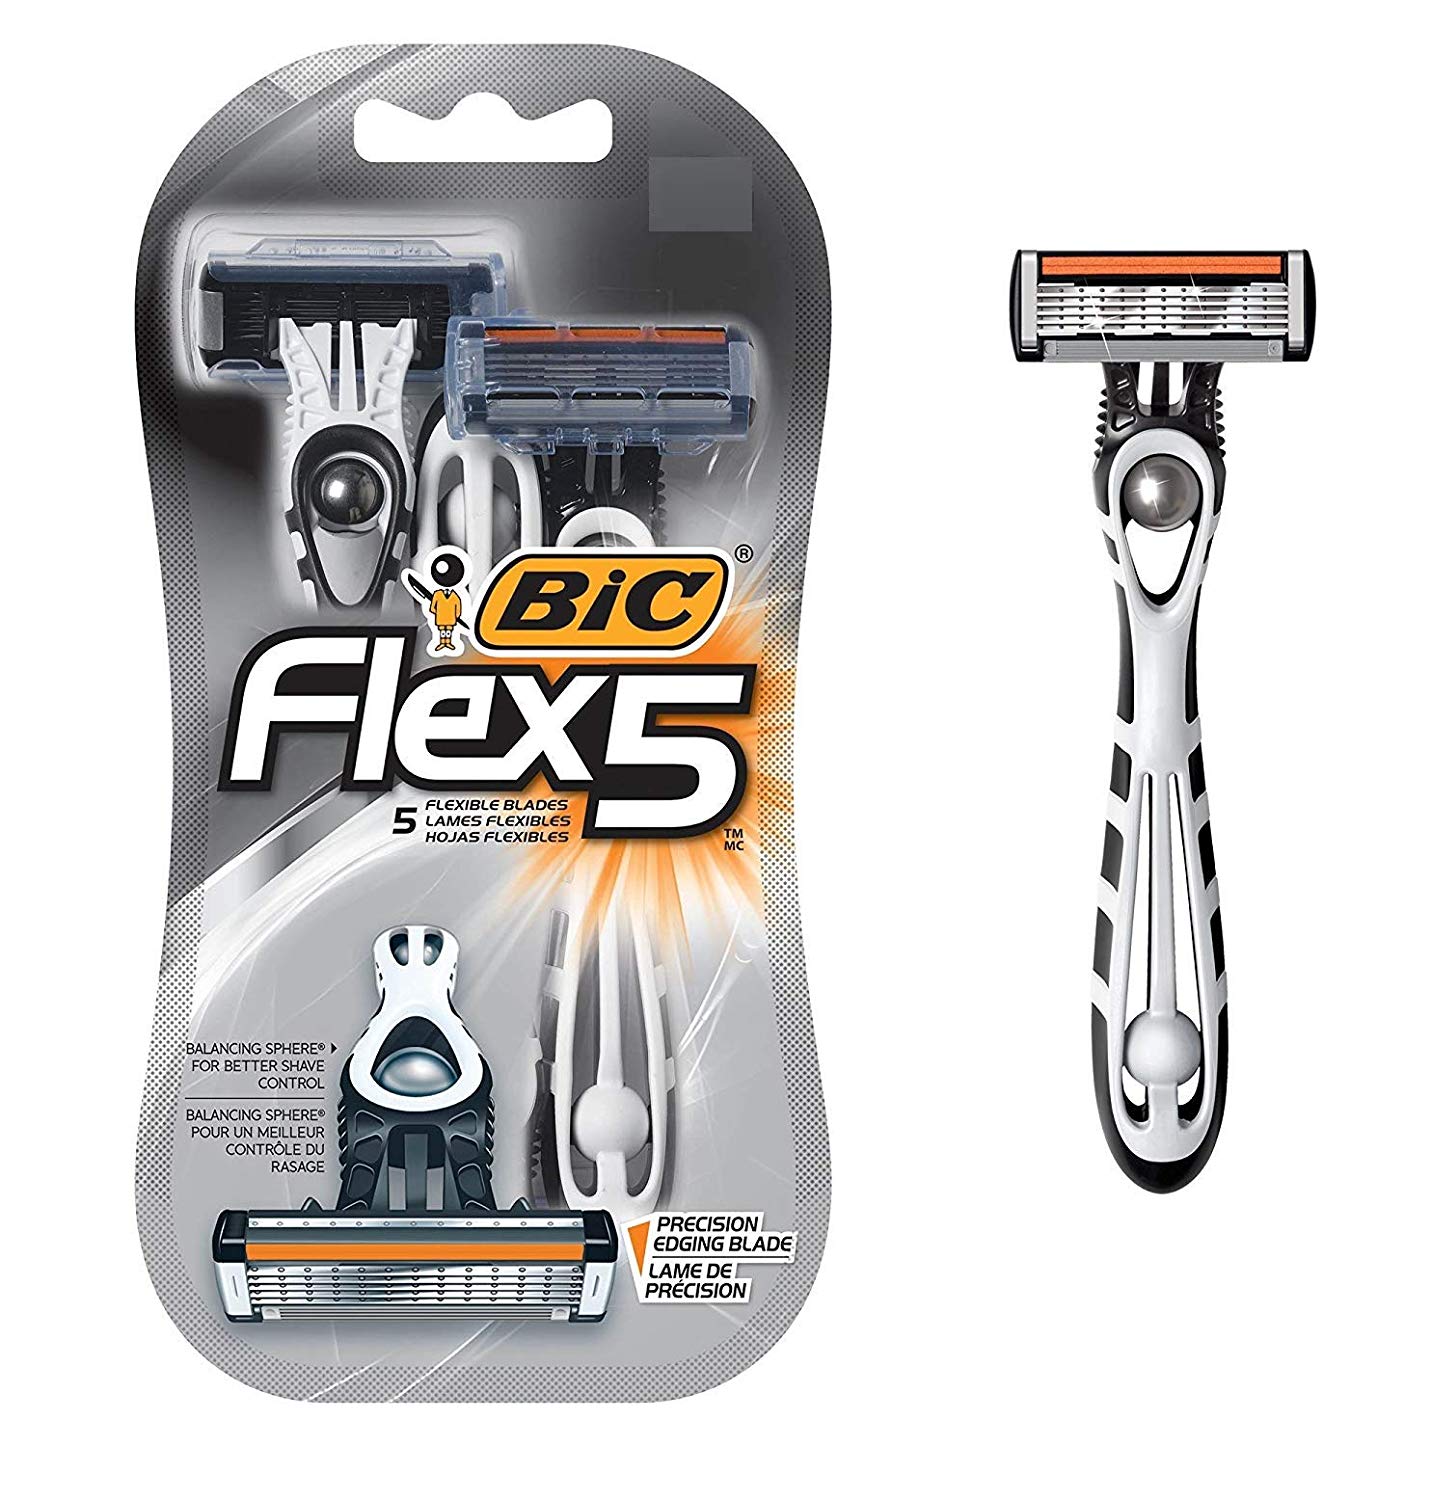 choice-of-a-bic-flex-5-or-soleil-sensitive-razor-for-free-from-bic